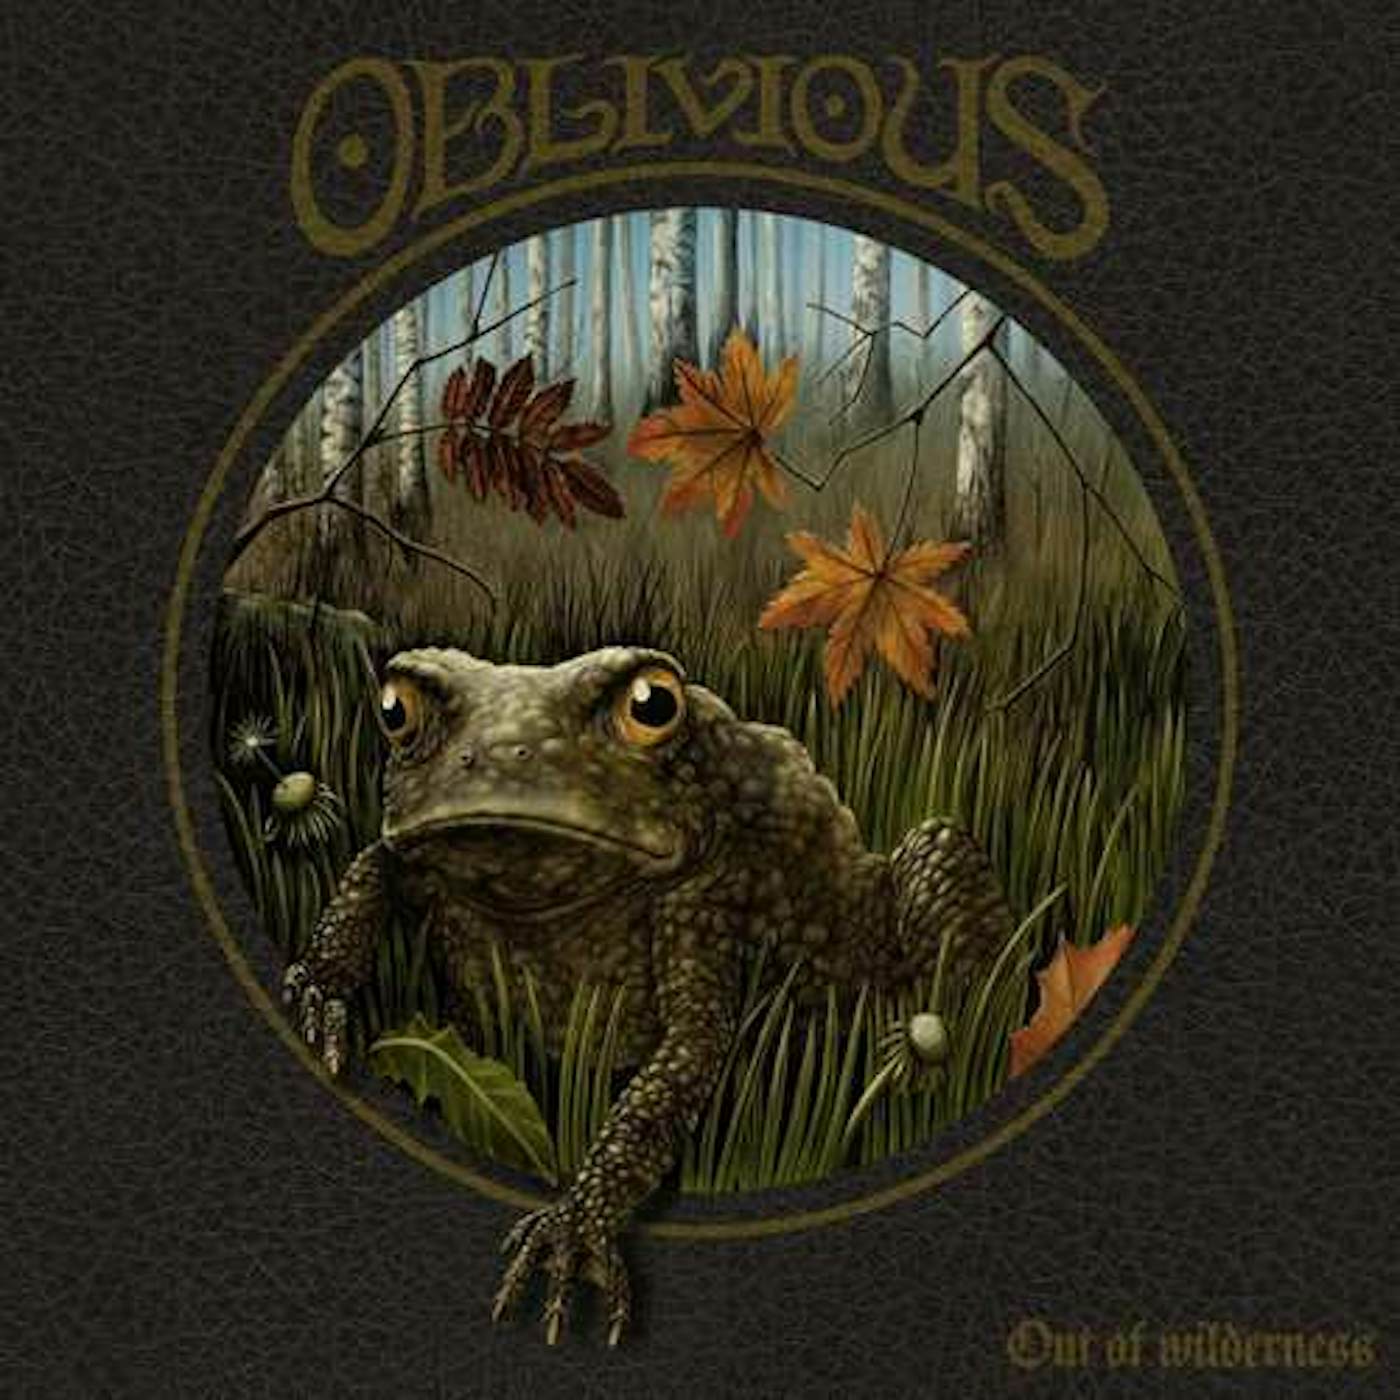 Oblivious Out of Wilderness Vinyl Record